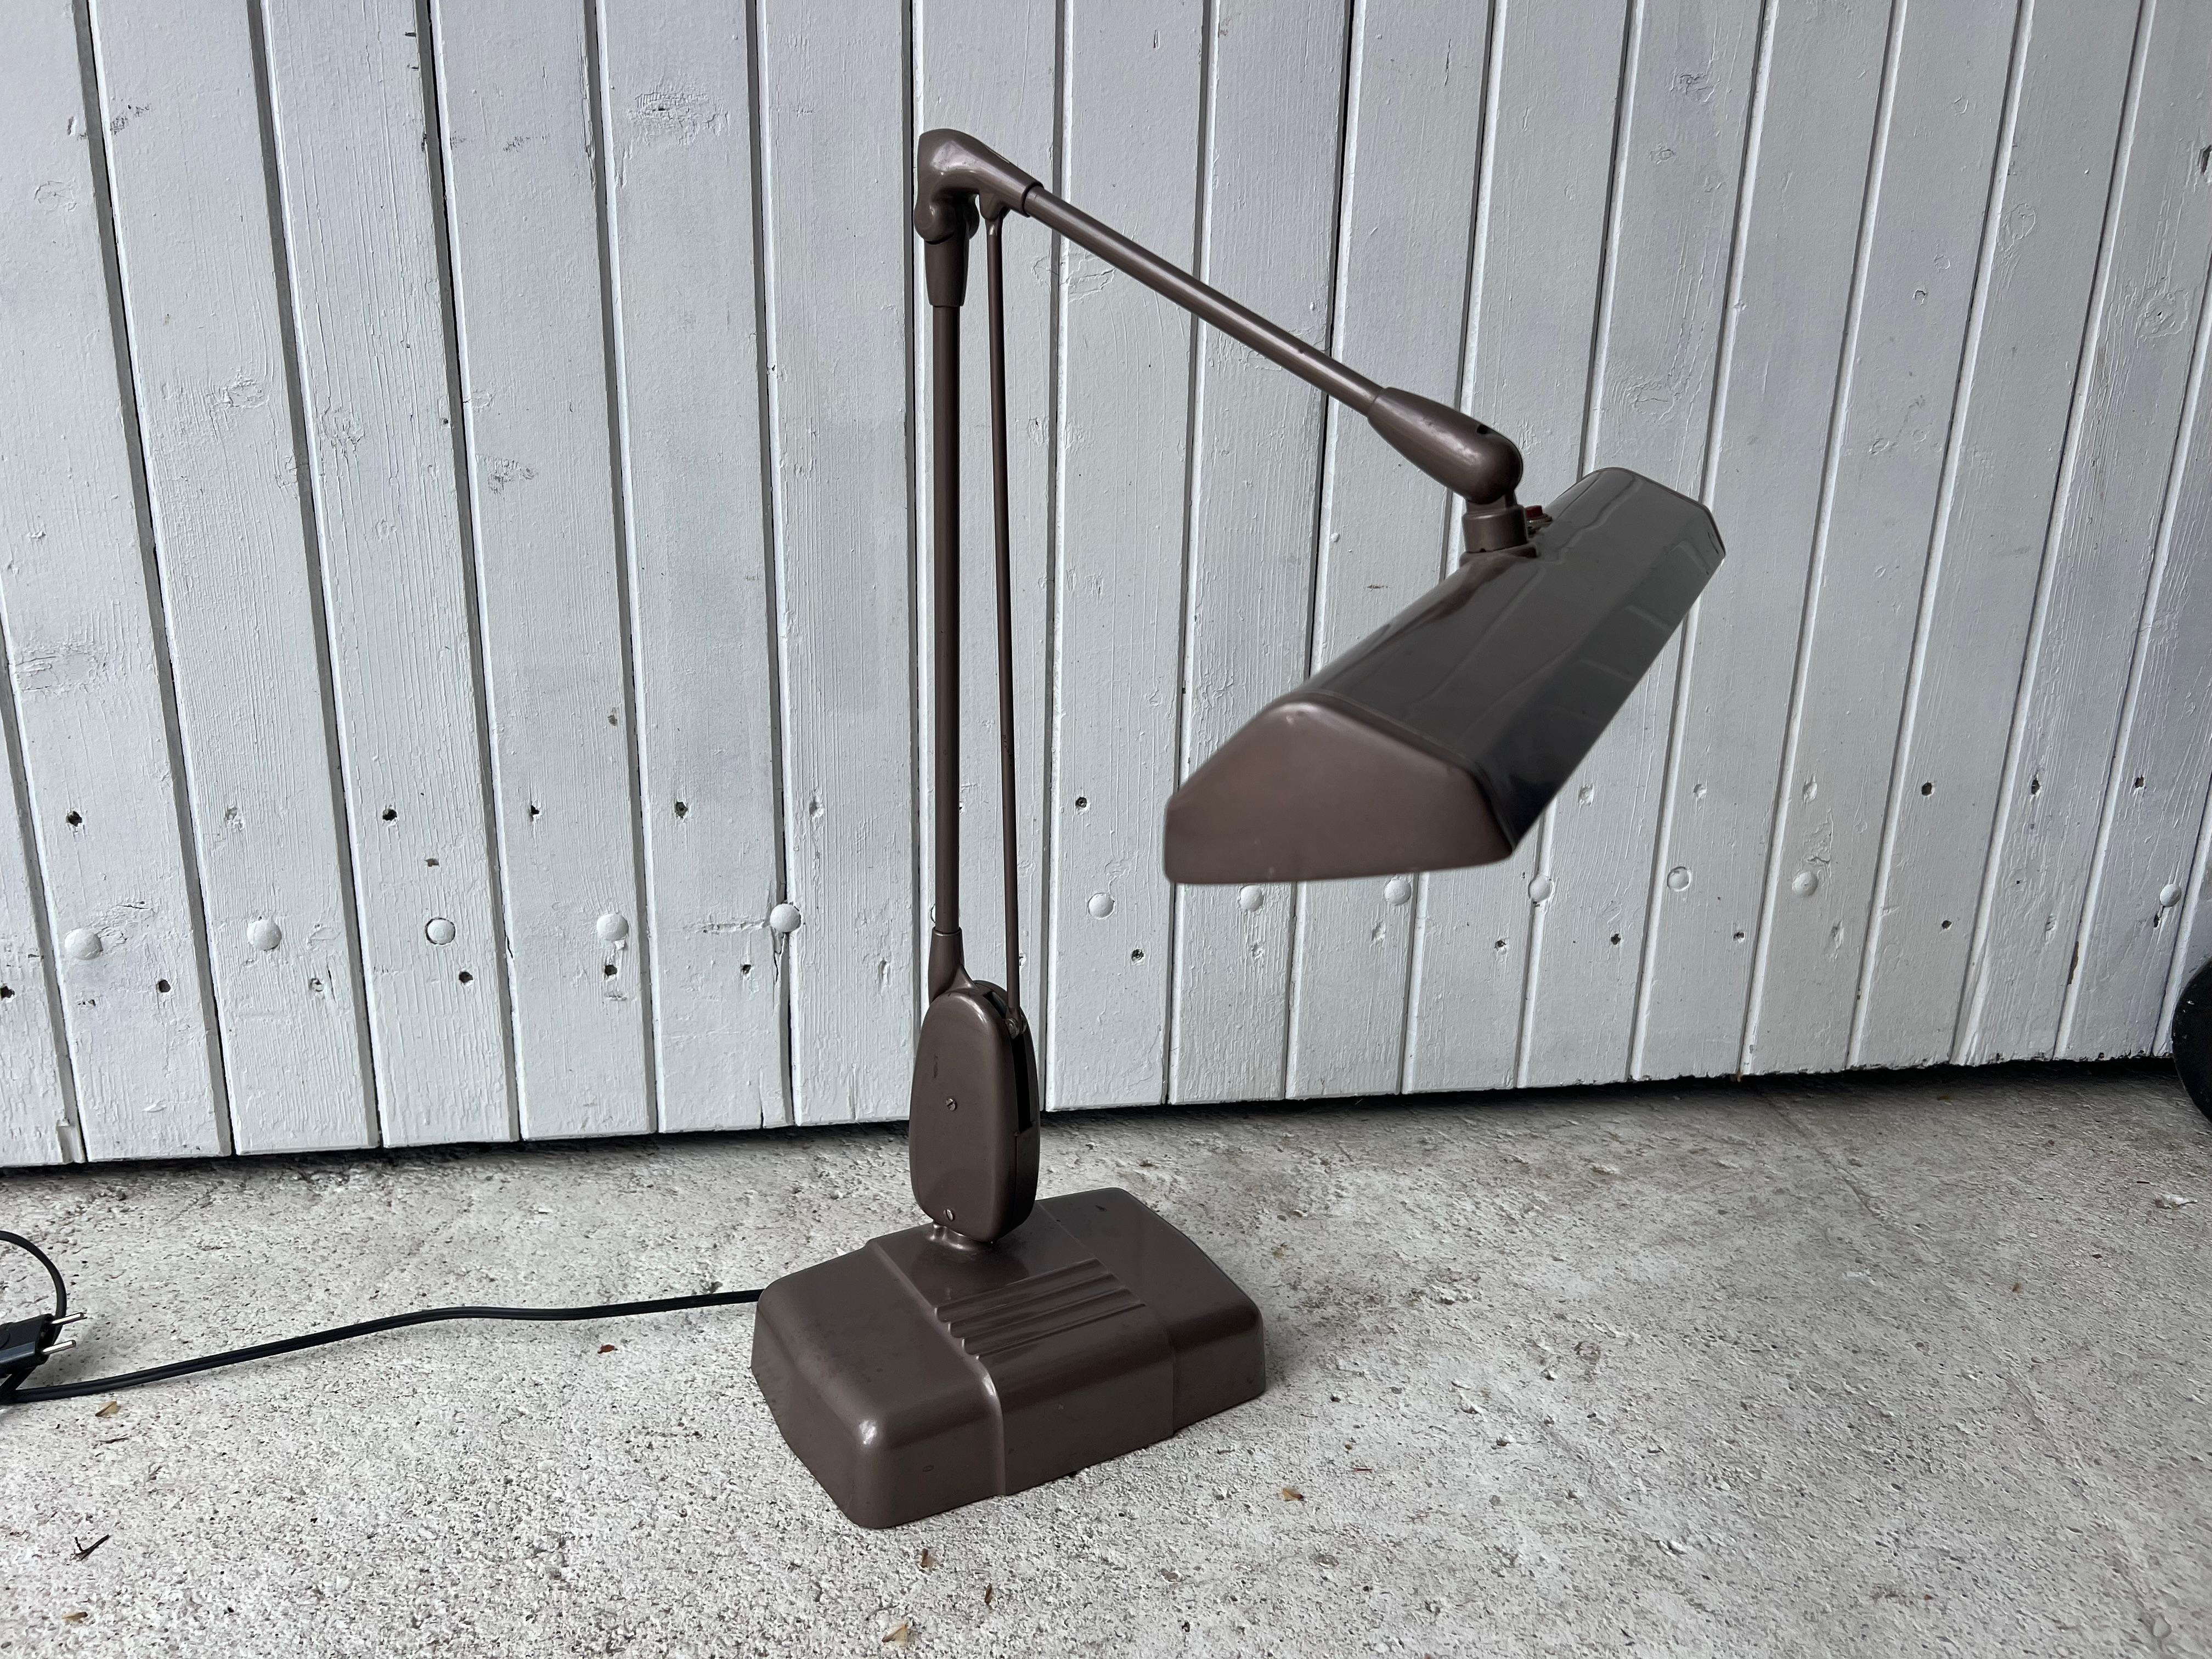 large industrial style desk lamp from Dazor Floating Saint Louis USA
from the 50s in grey/purple color
its articulated arm will allow you to optimize the lighting as best as possible